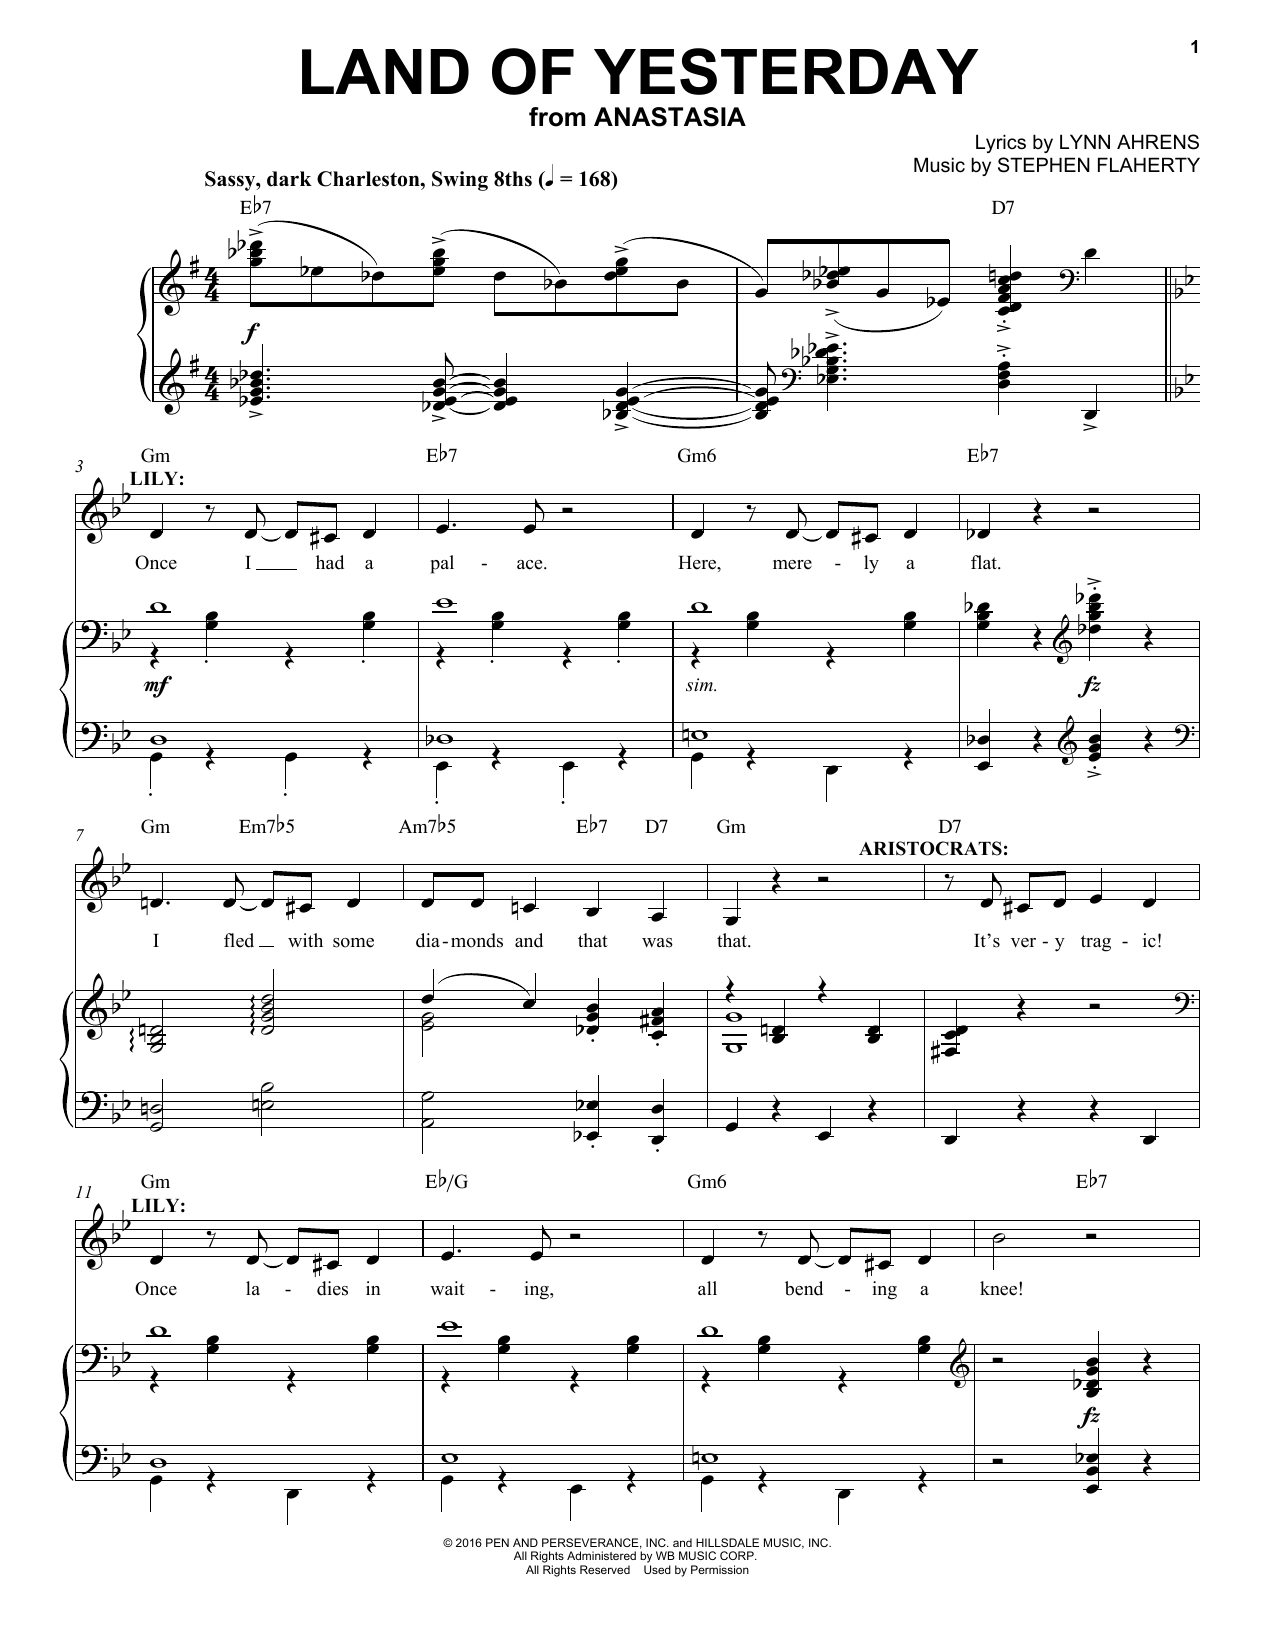 Stephen Flaherty Land Of Yesterday sheet music notes and chords. Download Printable PDF.